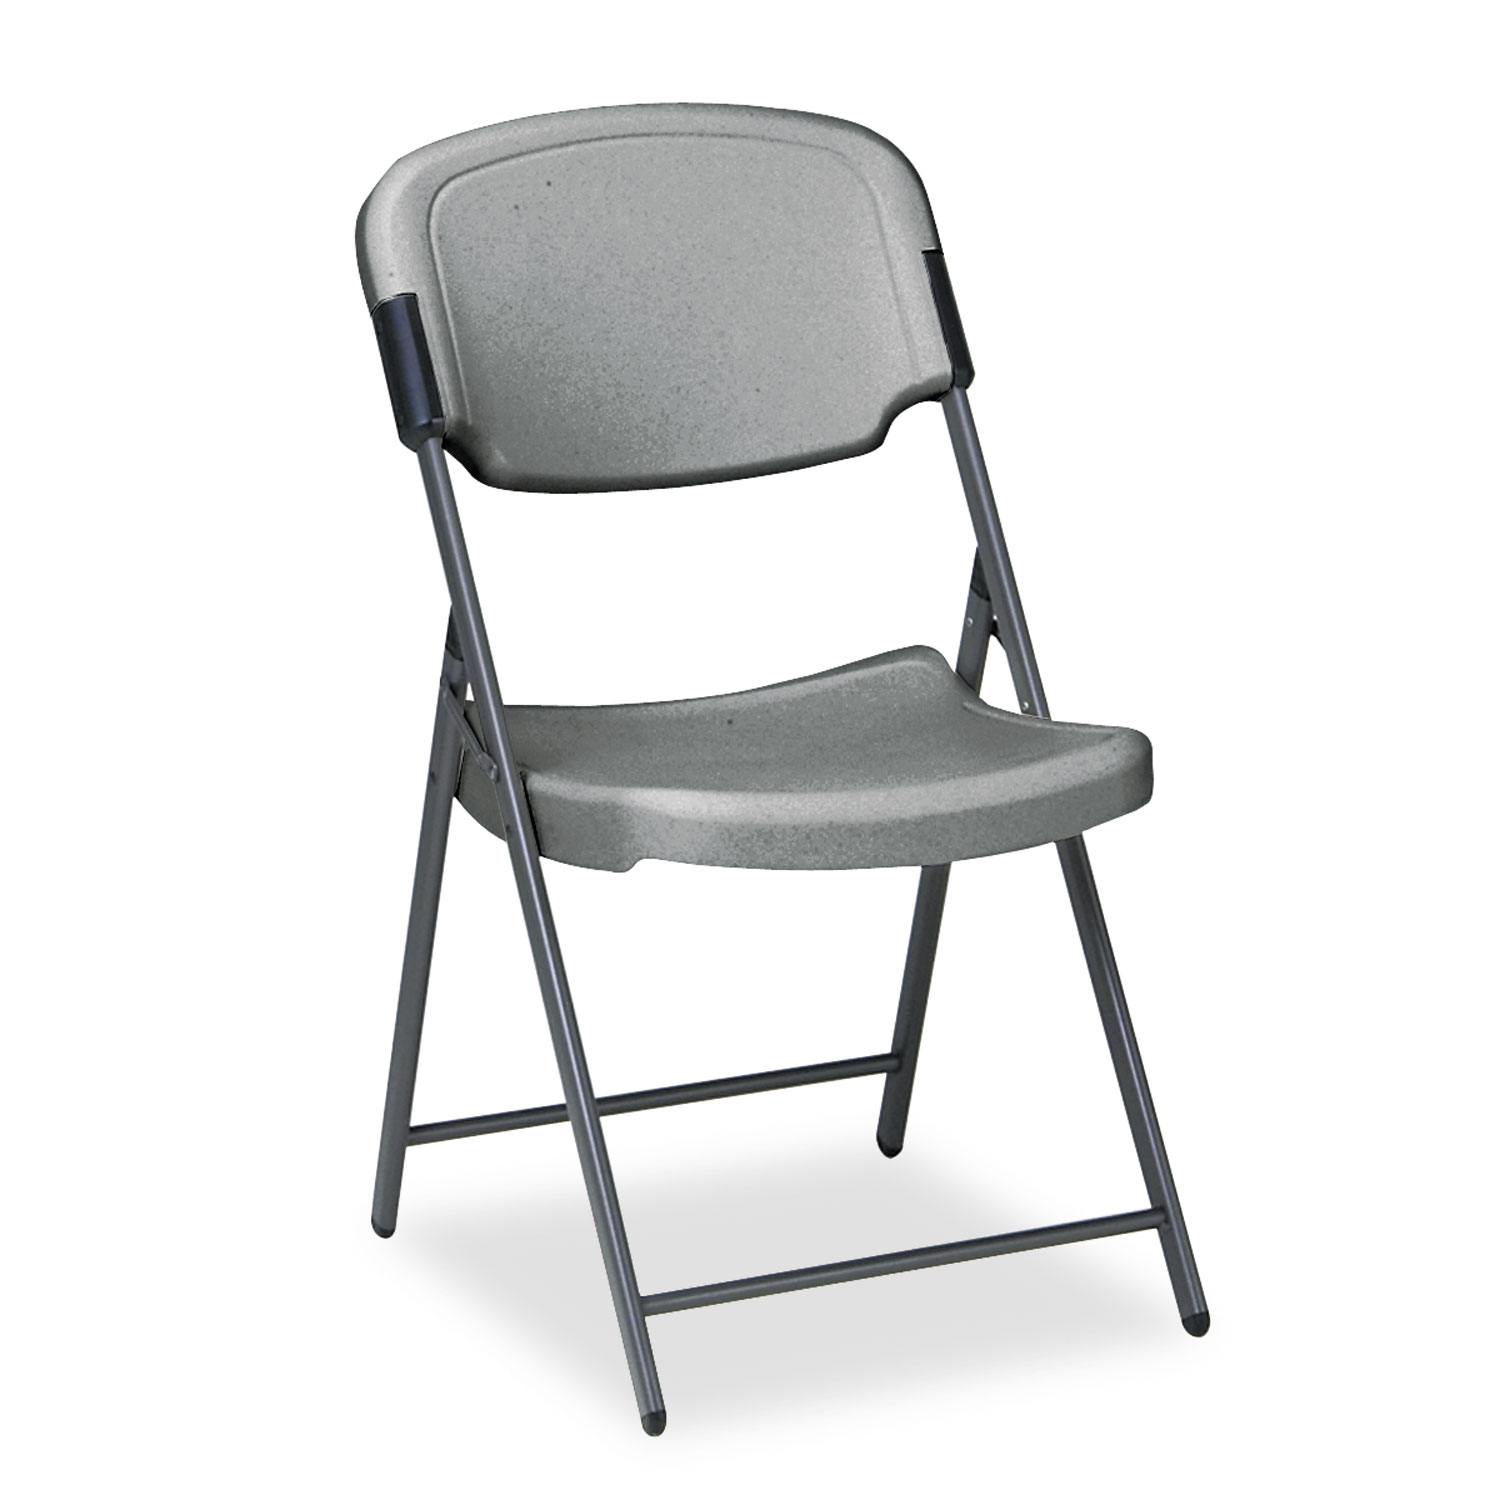  Iceberg 64007 Rough 'N Ready Folding Chair, Charcoal Seat/Charcoal Back, Silver Base (ICE64007) 